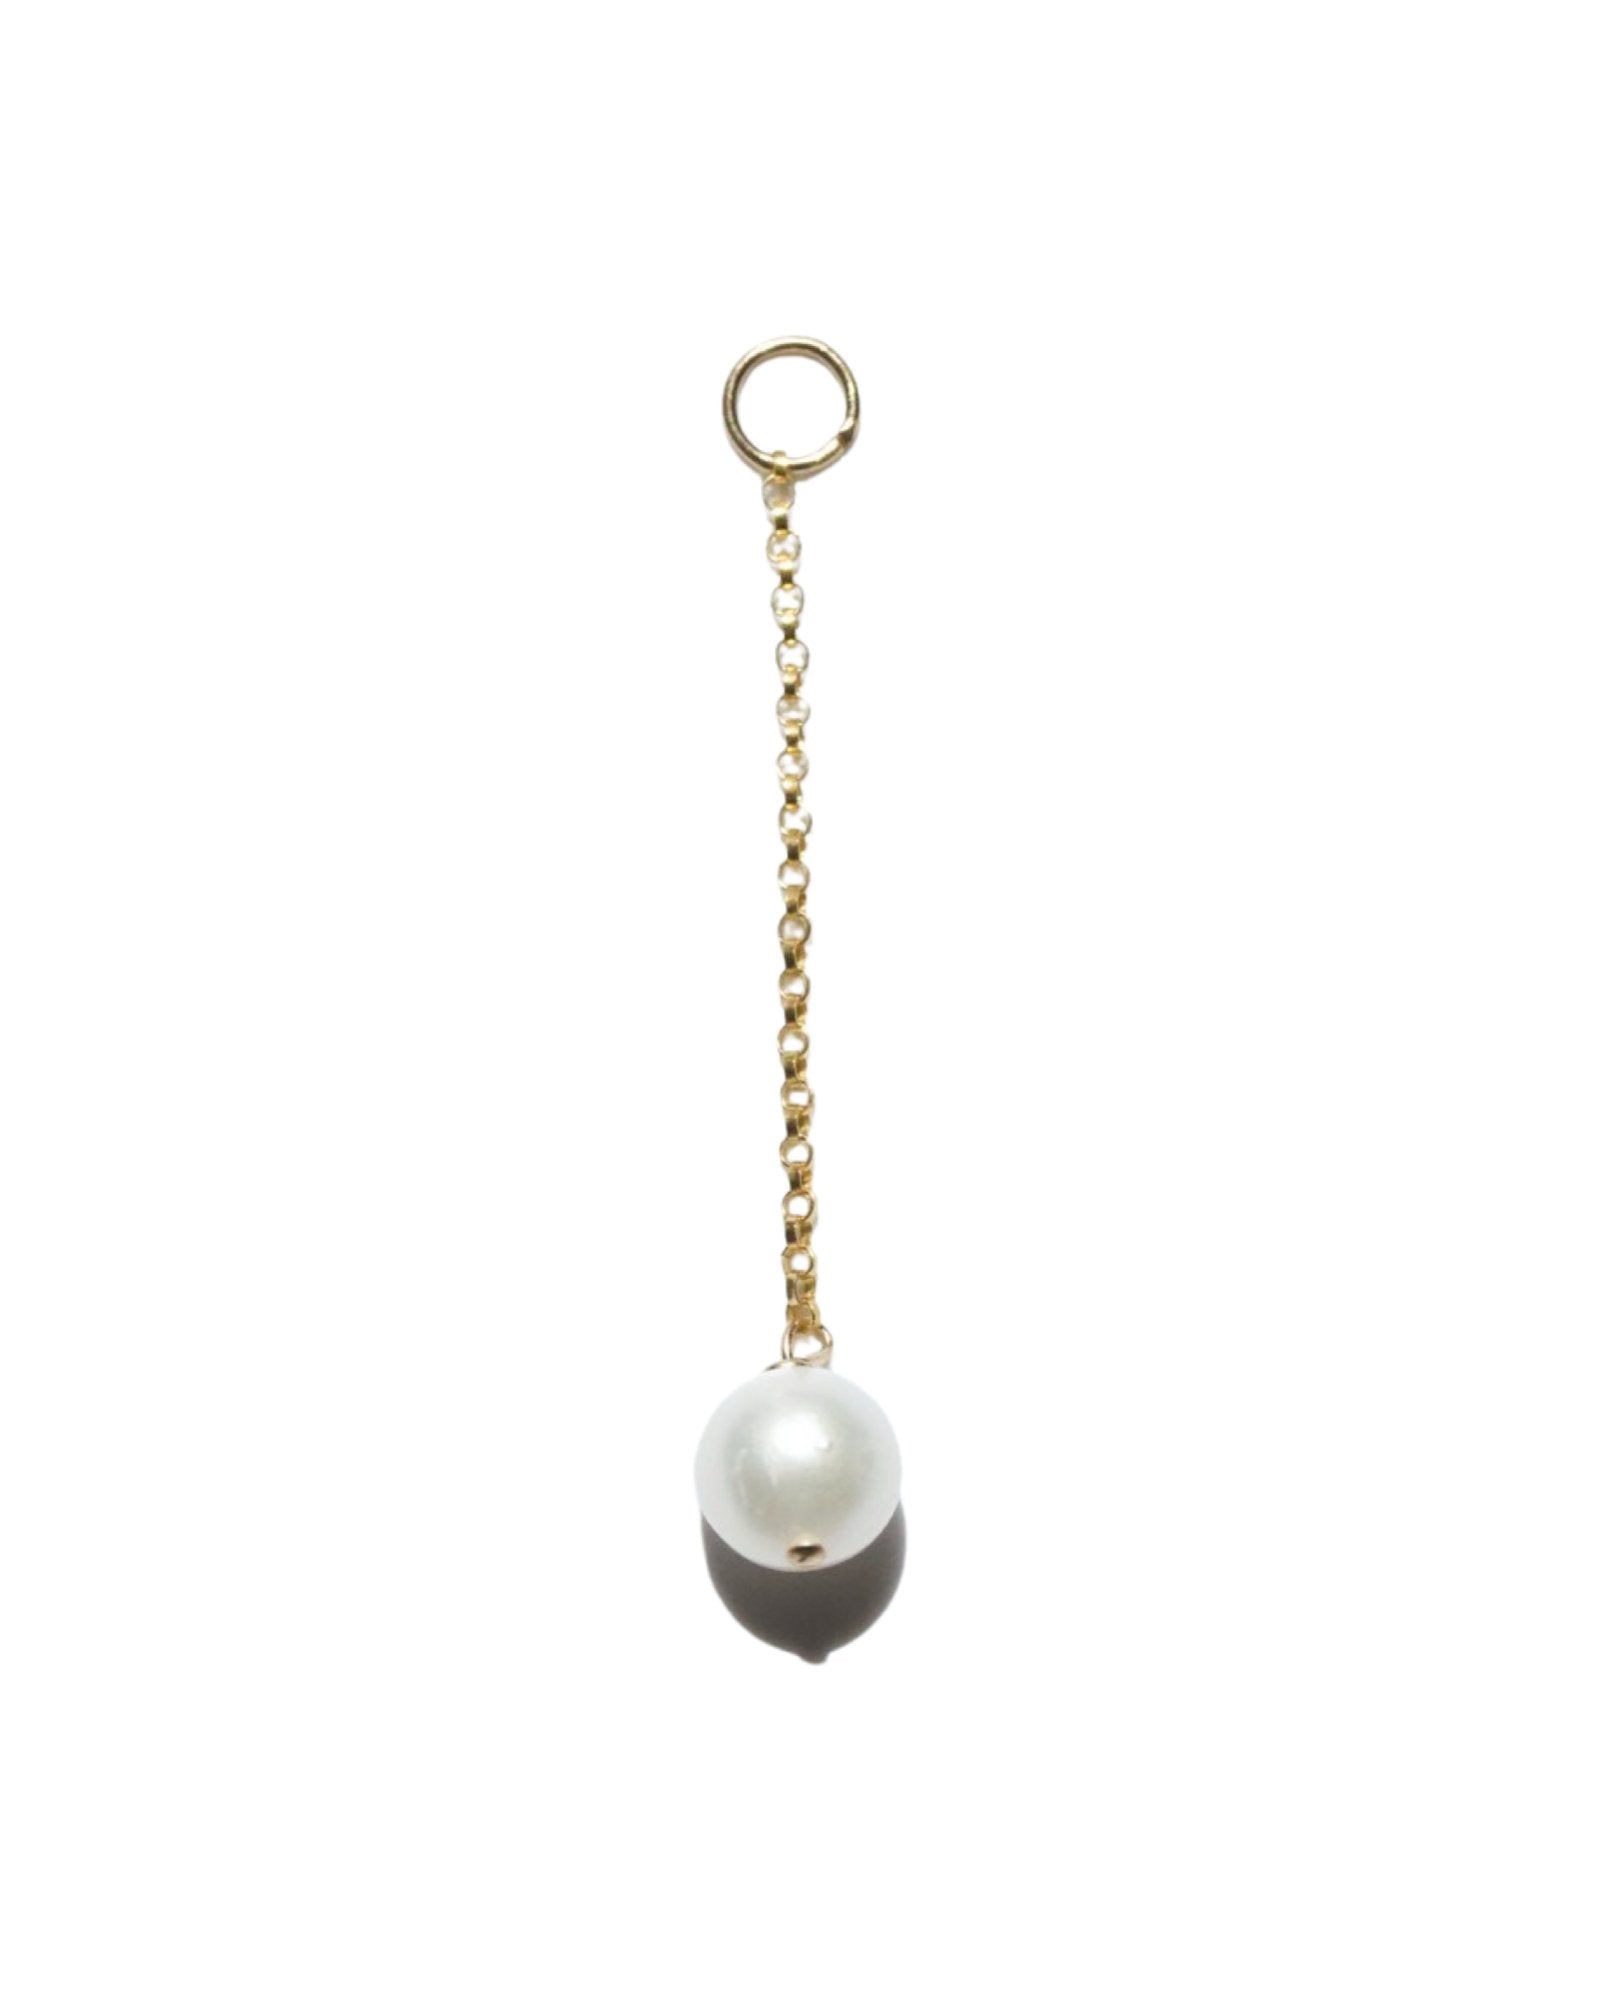 PEARL DROP CHARM - DE.FINE Collection Jewelry